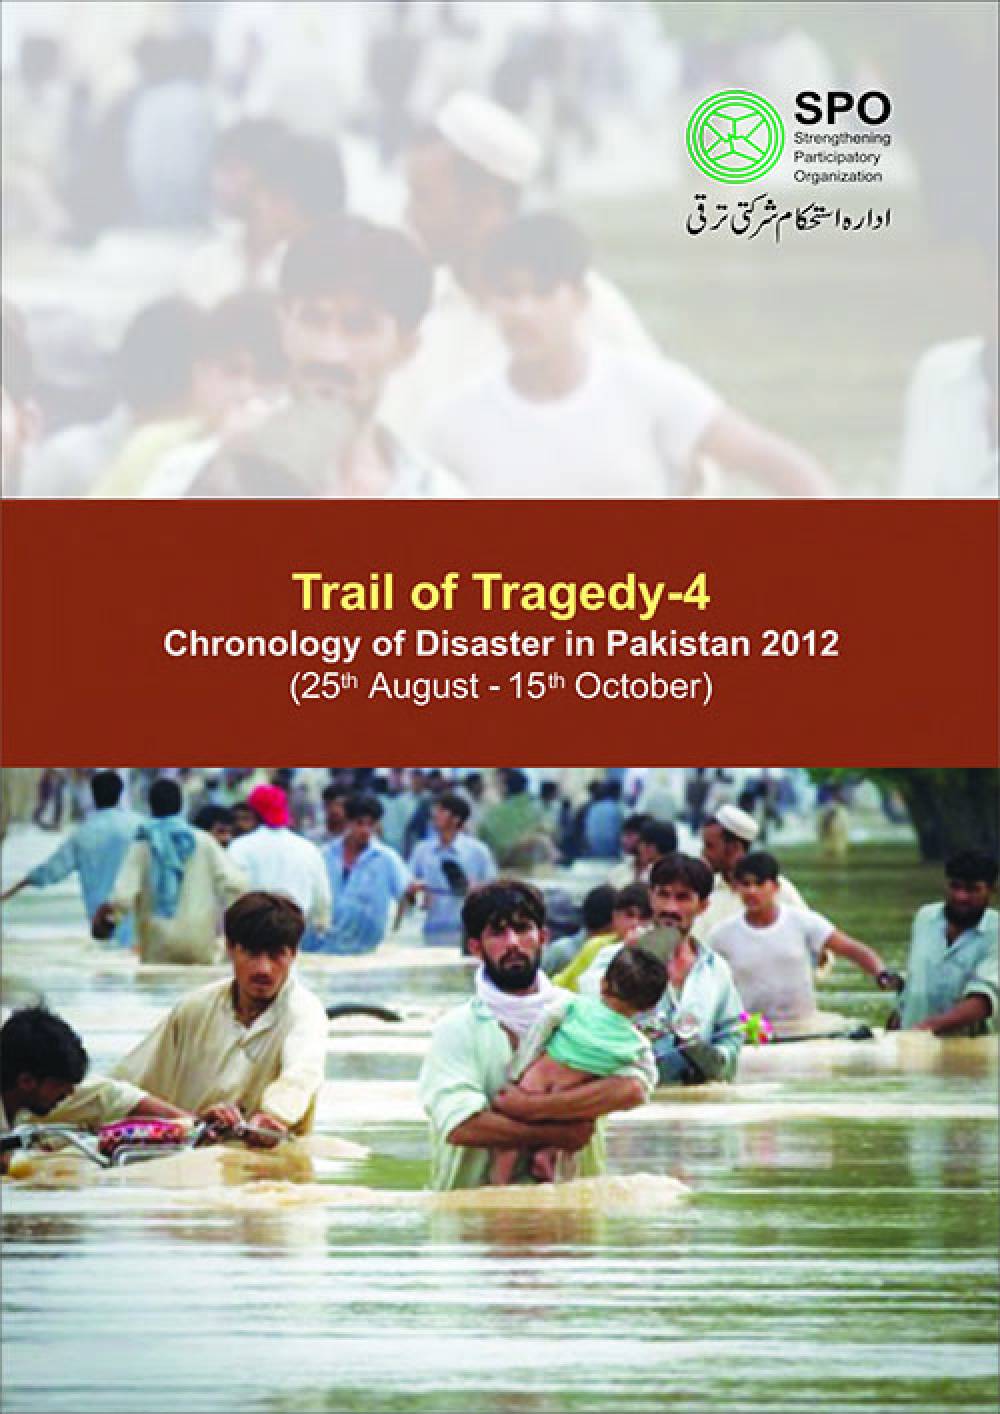 Trail of Tragedy - 4 Chronology of Disaster in Pakistan